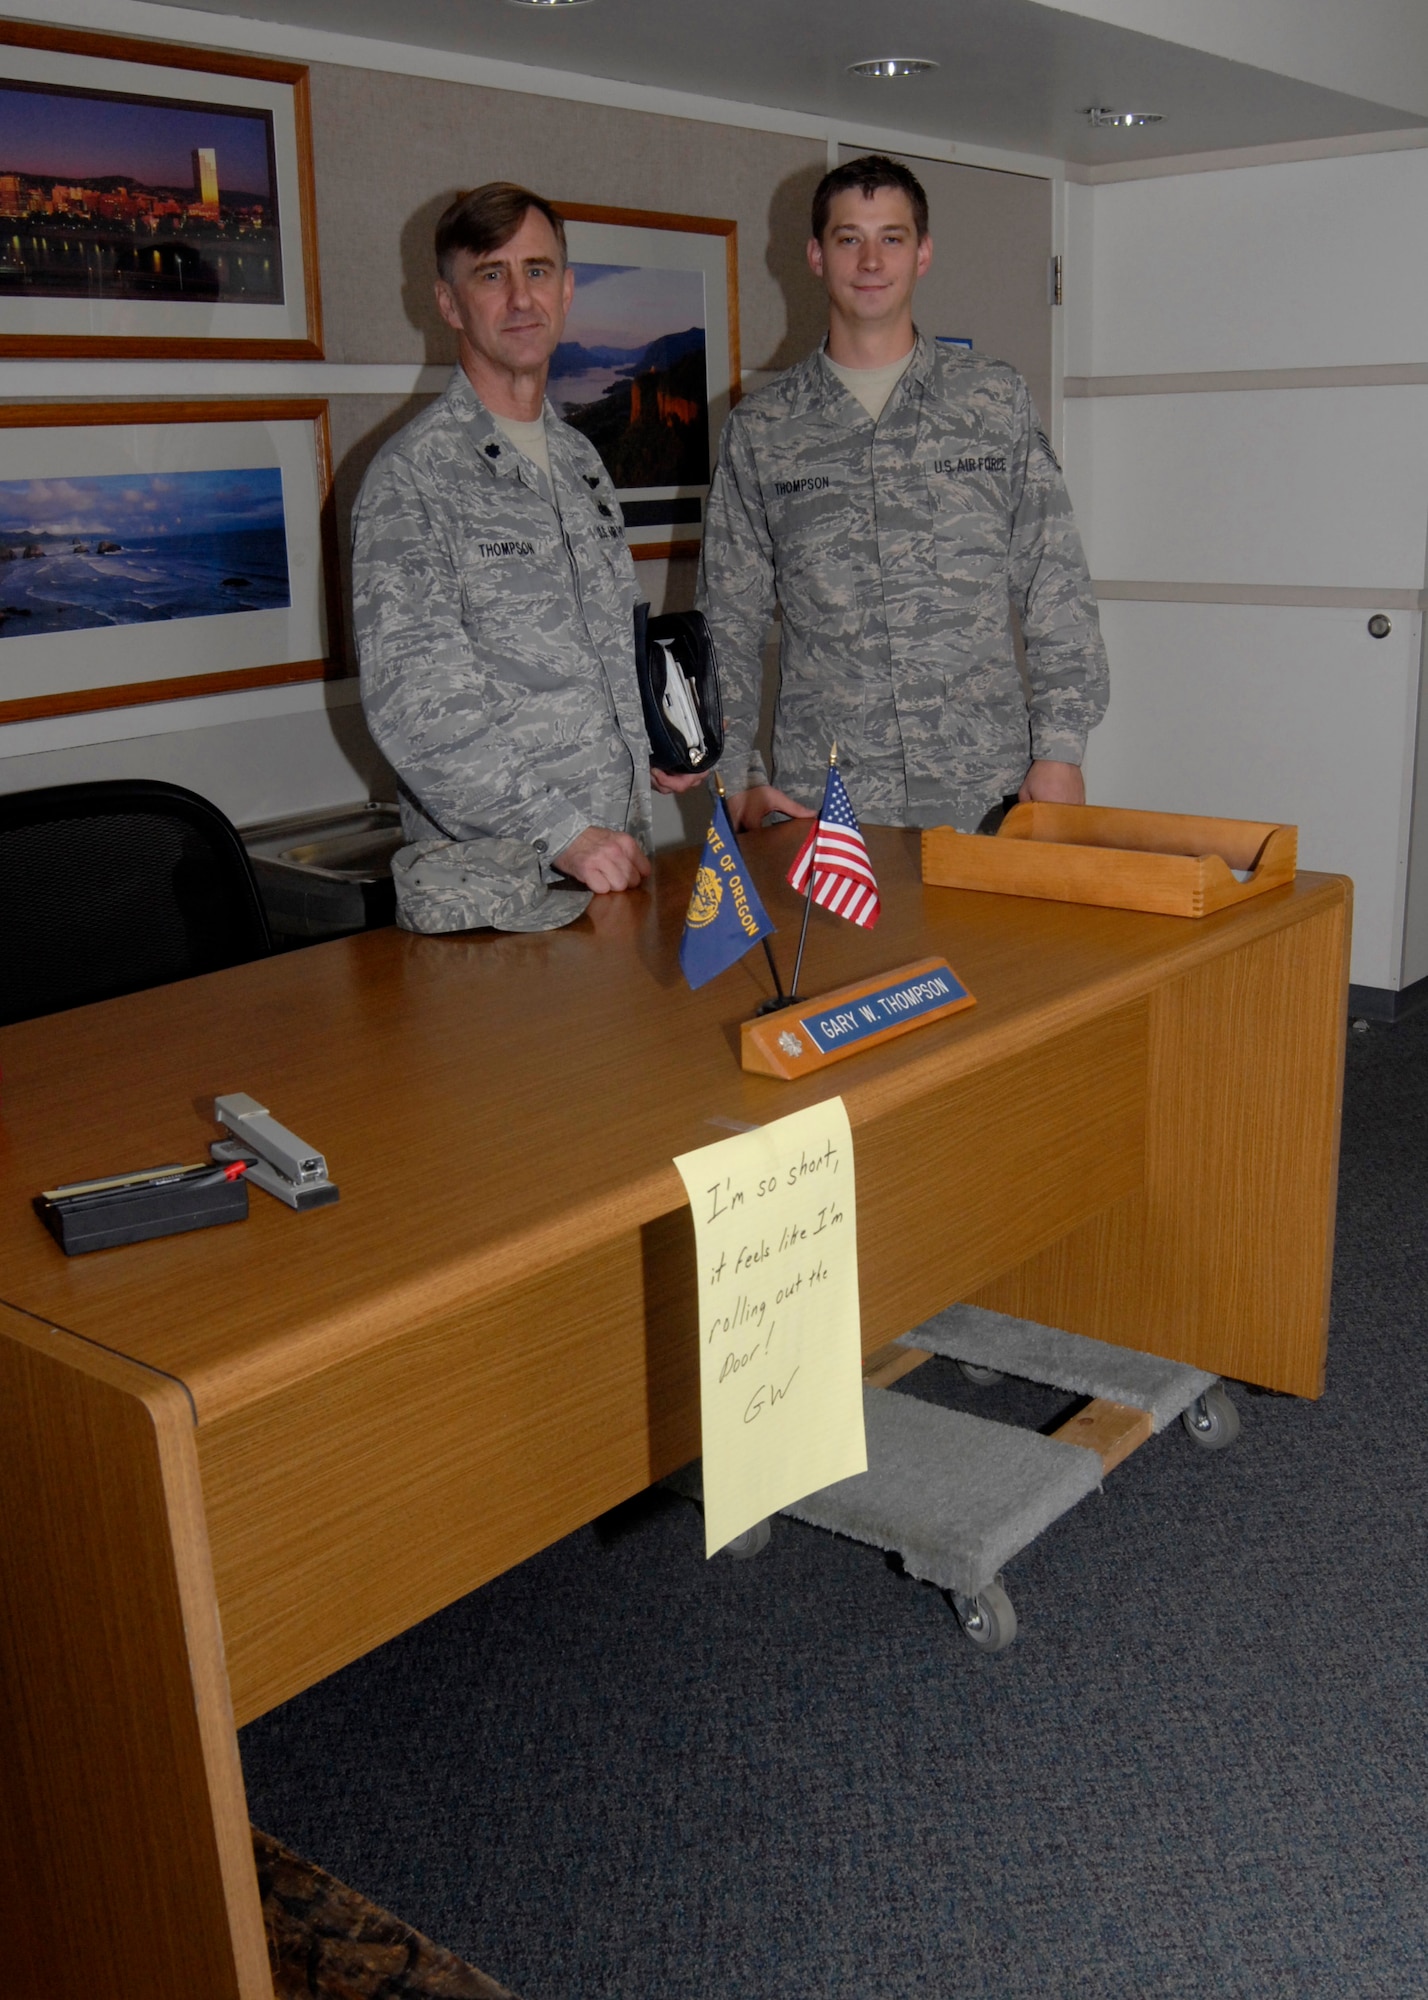 Oregon Air National Guard Lt. Col. Gary W. Thompson and his son Staff Sgt. Joshua Thompson stand behind Gary’s desk as it has been put on weeks in the hallway to open his old office on his last day of active duty service, Oct. 31, 2012 at the Portland Air National Guard Base, Portland, Ore. (U.S. Air Force photo by Tech. Sgt. John Hughel, 142nd Fighter Wing Public Affairs / released)  
